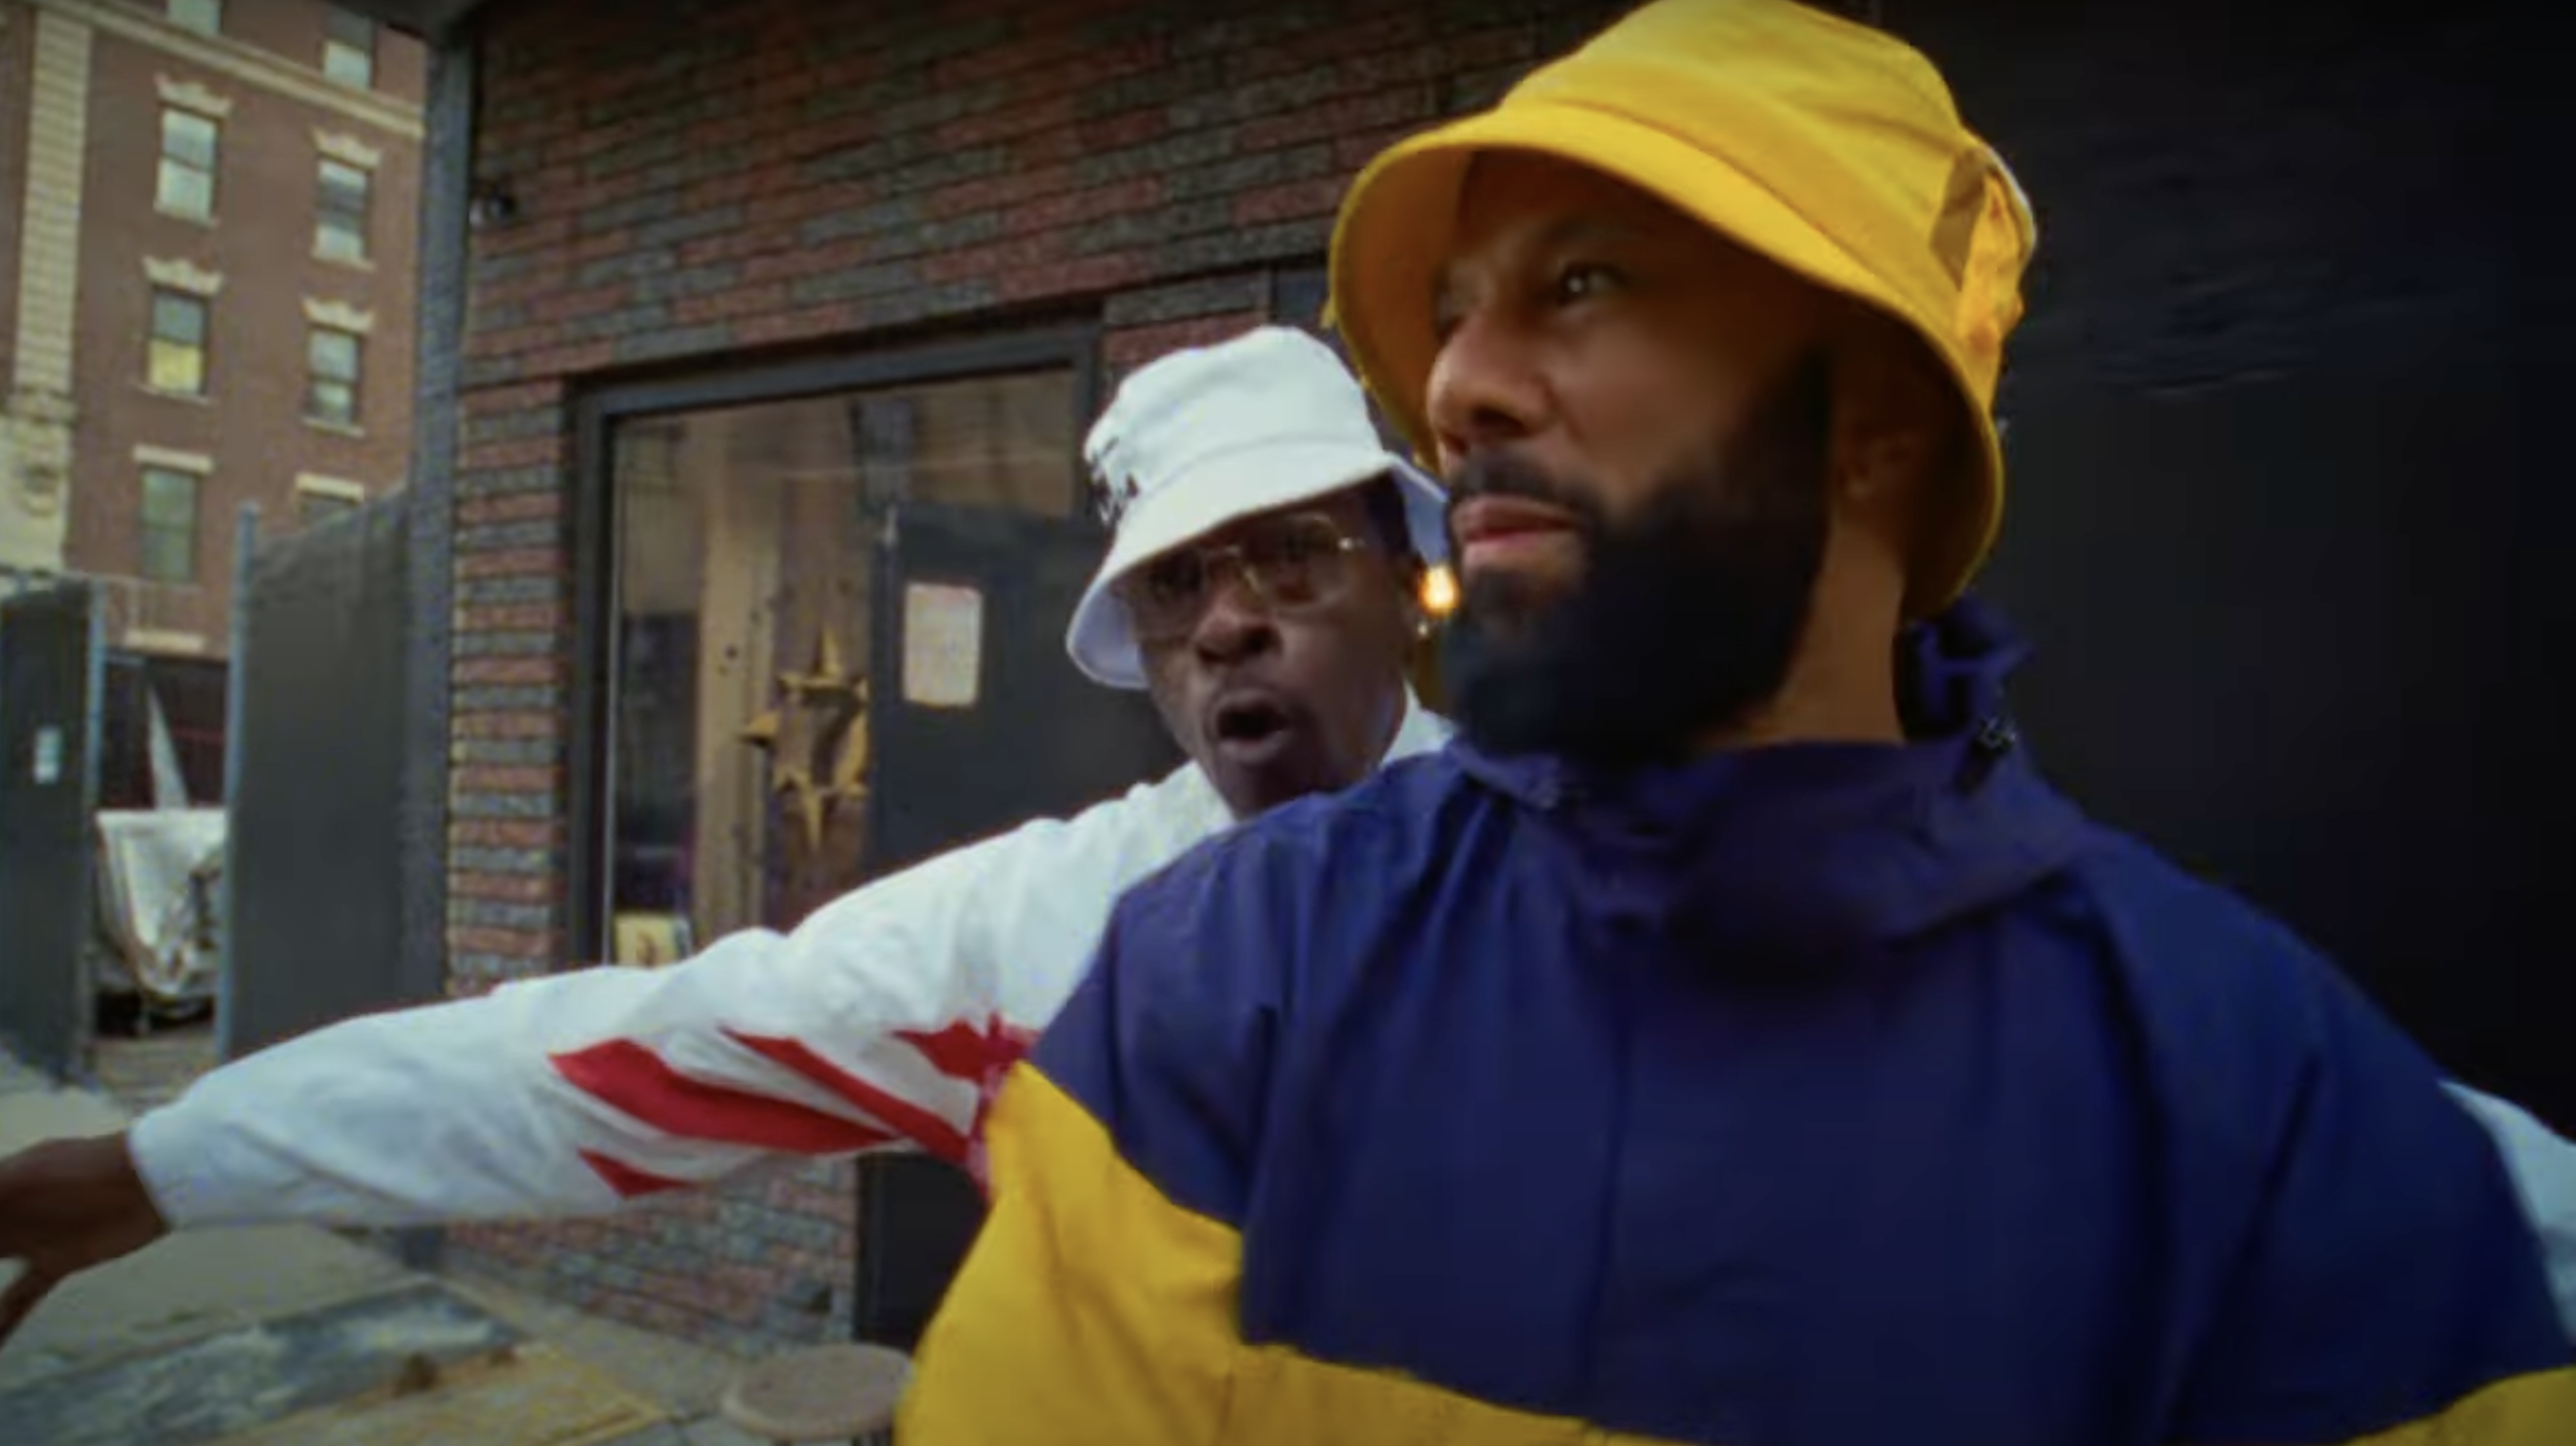 Common And Pete Rock Embrace The NYC Community In New “Wise Up” Music Video